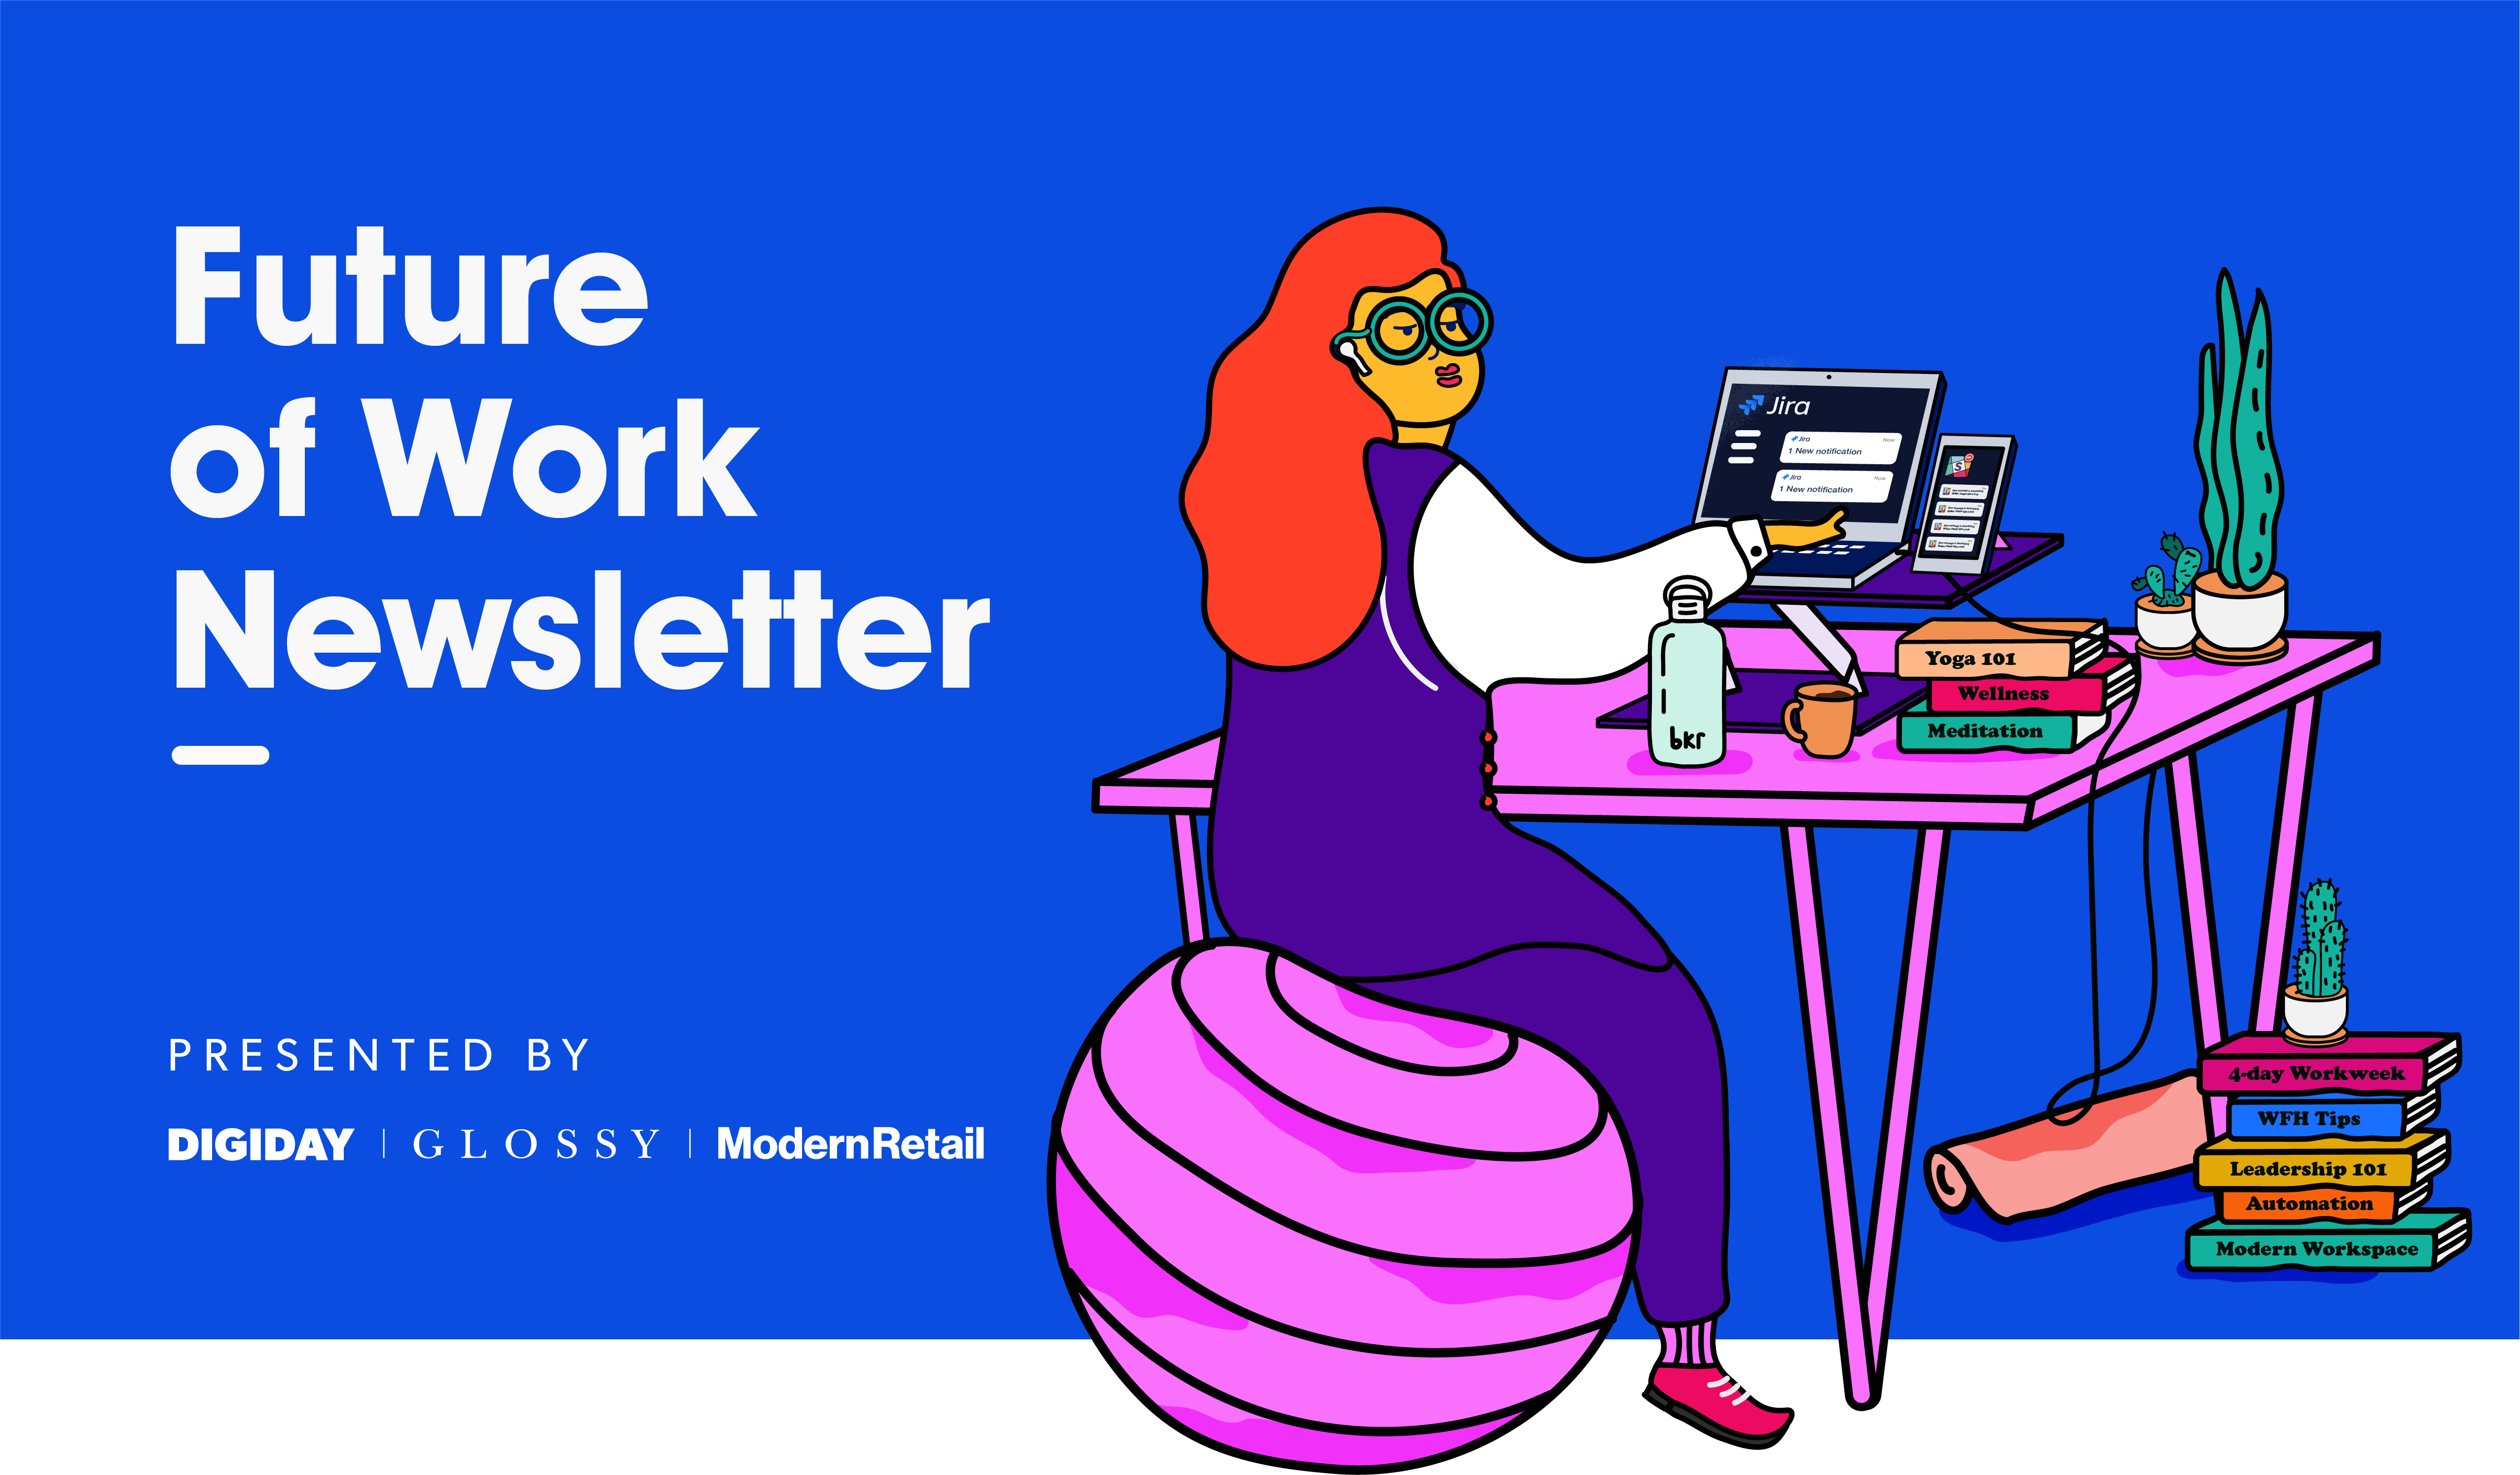 Introducing the Future of Work Newsletter